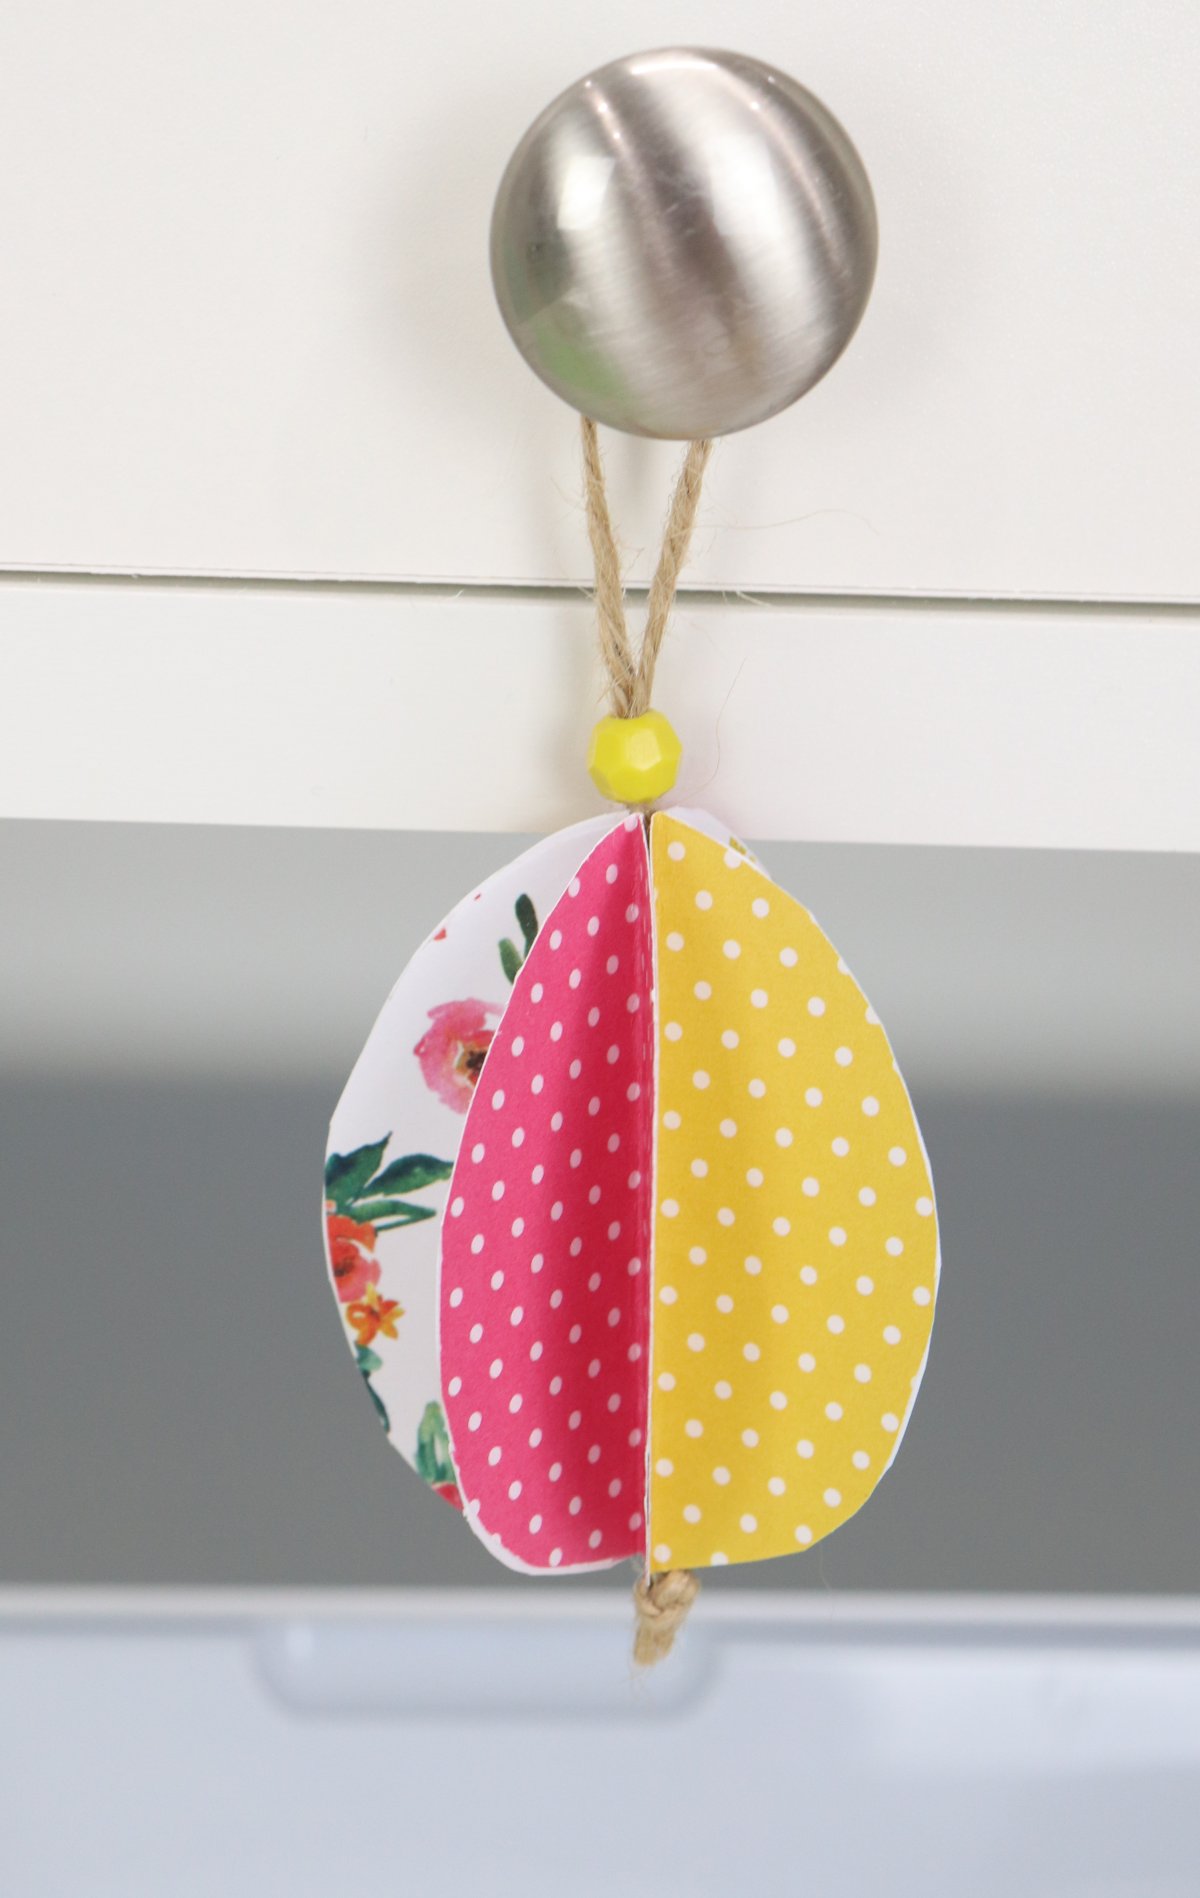 Image contains a 3-D paper egg made of patterned scrapbook paper hanging from a silver drawer knob. 